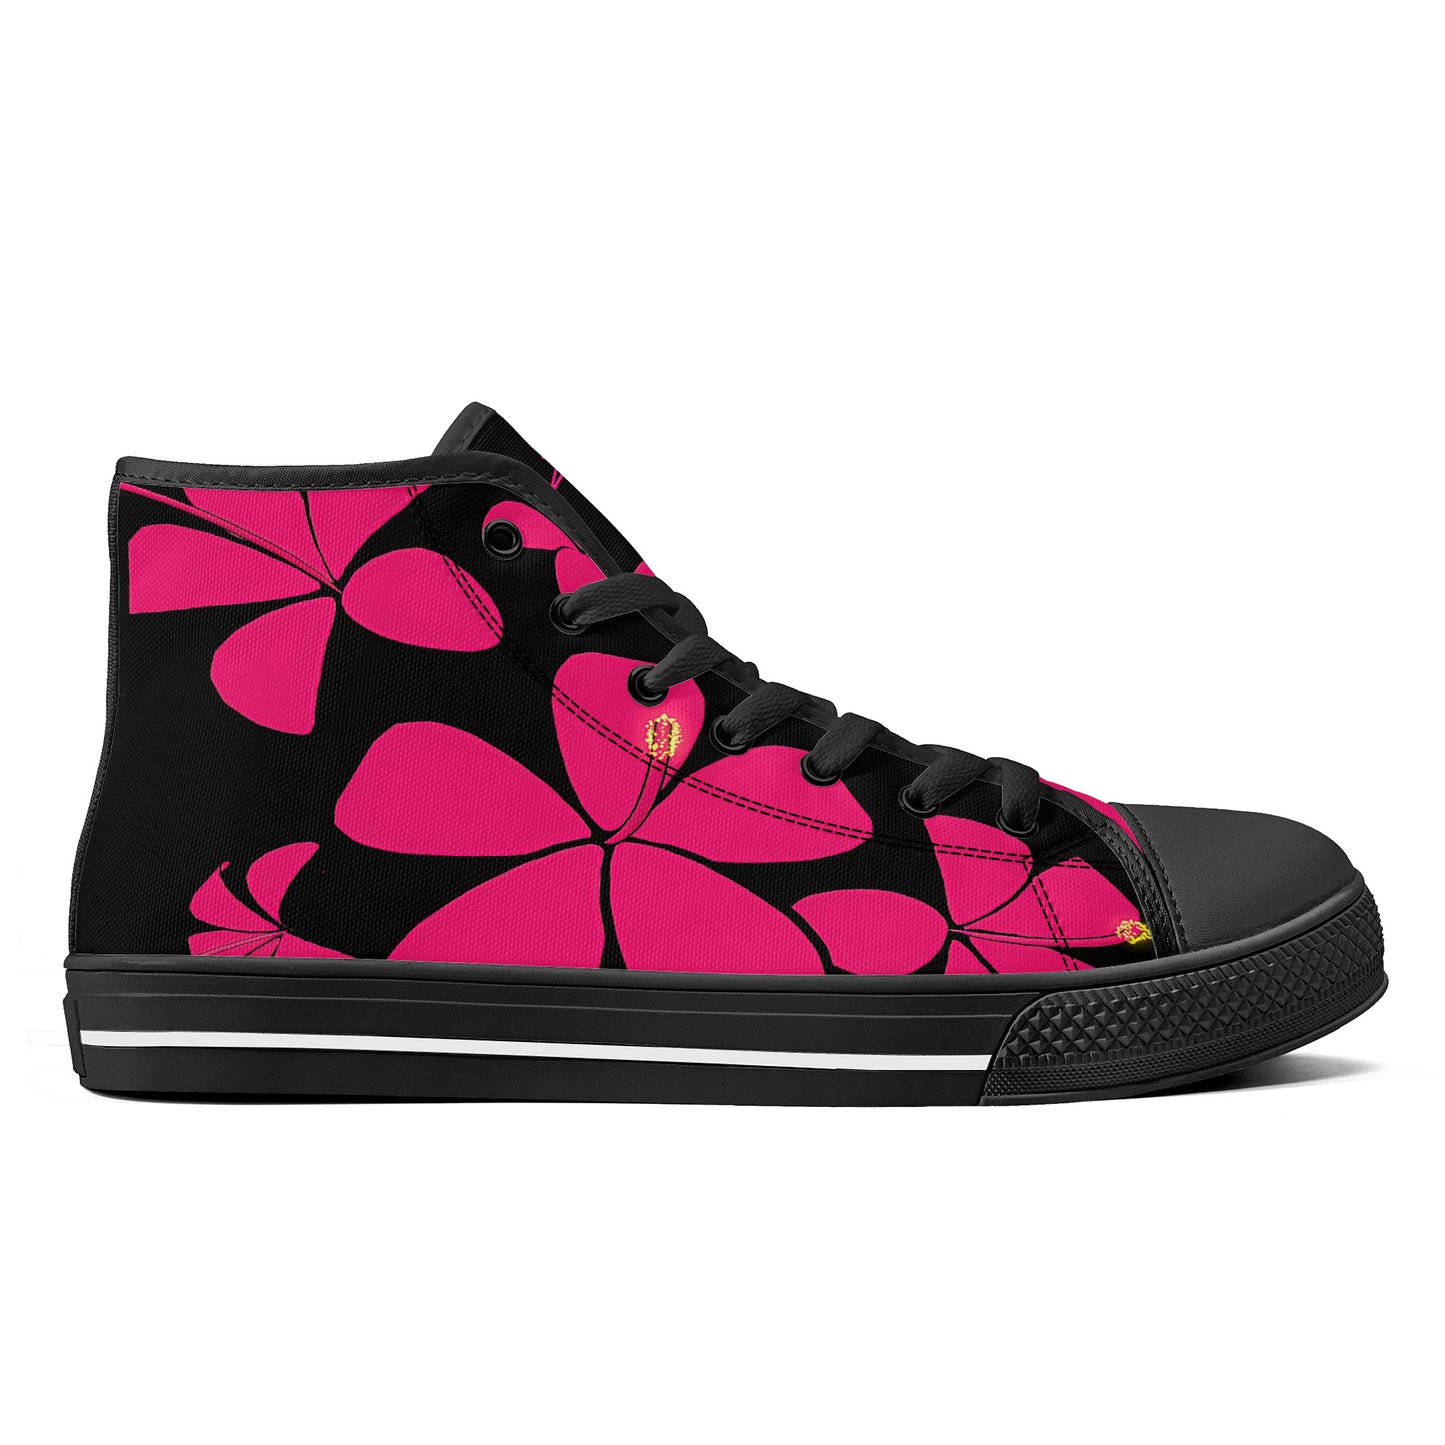 Tropical Vibes Pink High-Top Canvas Shoes - Black